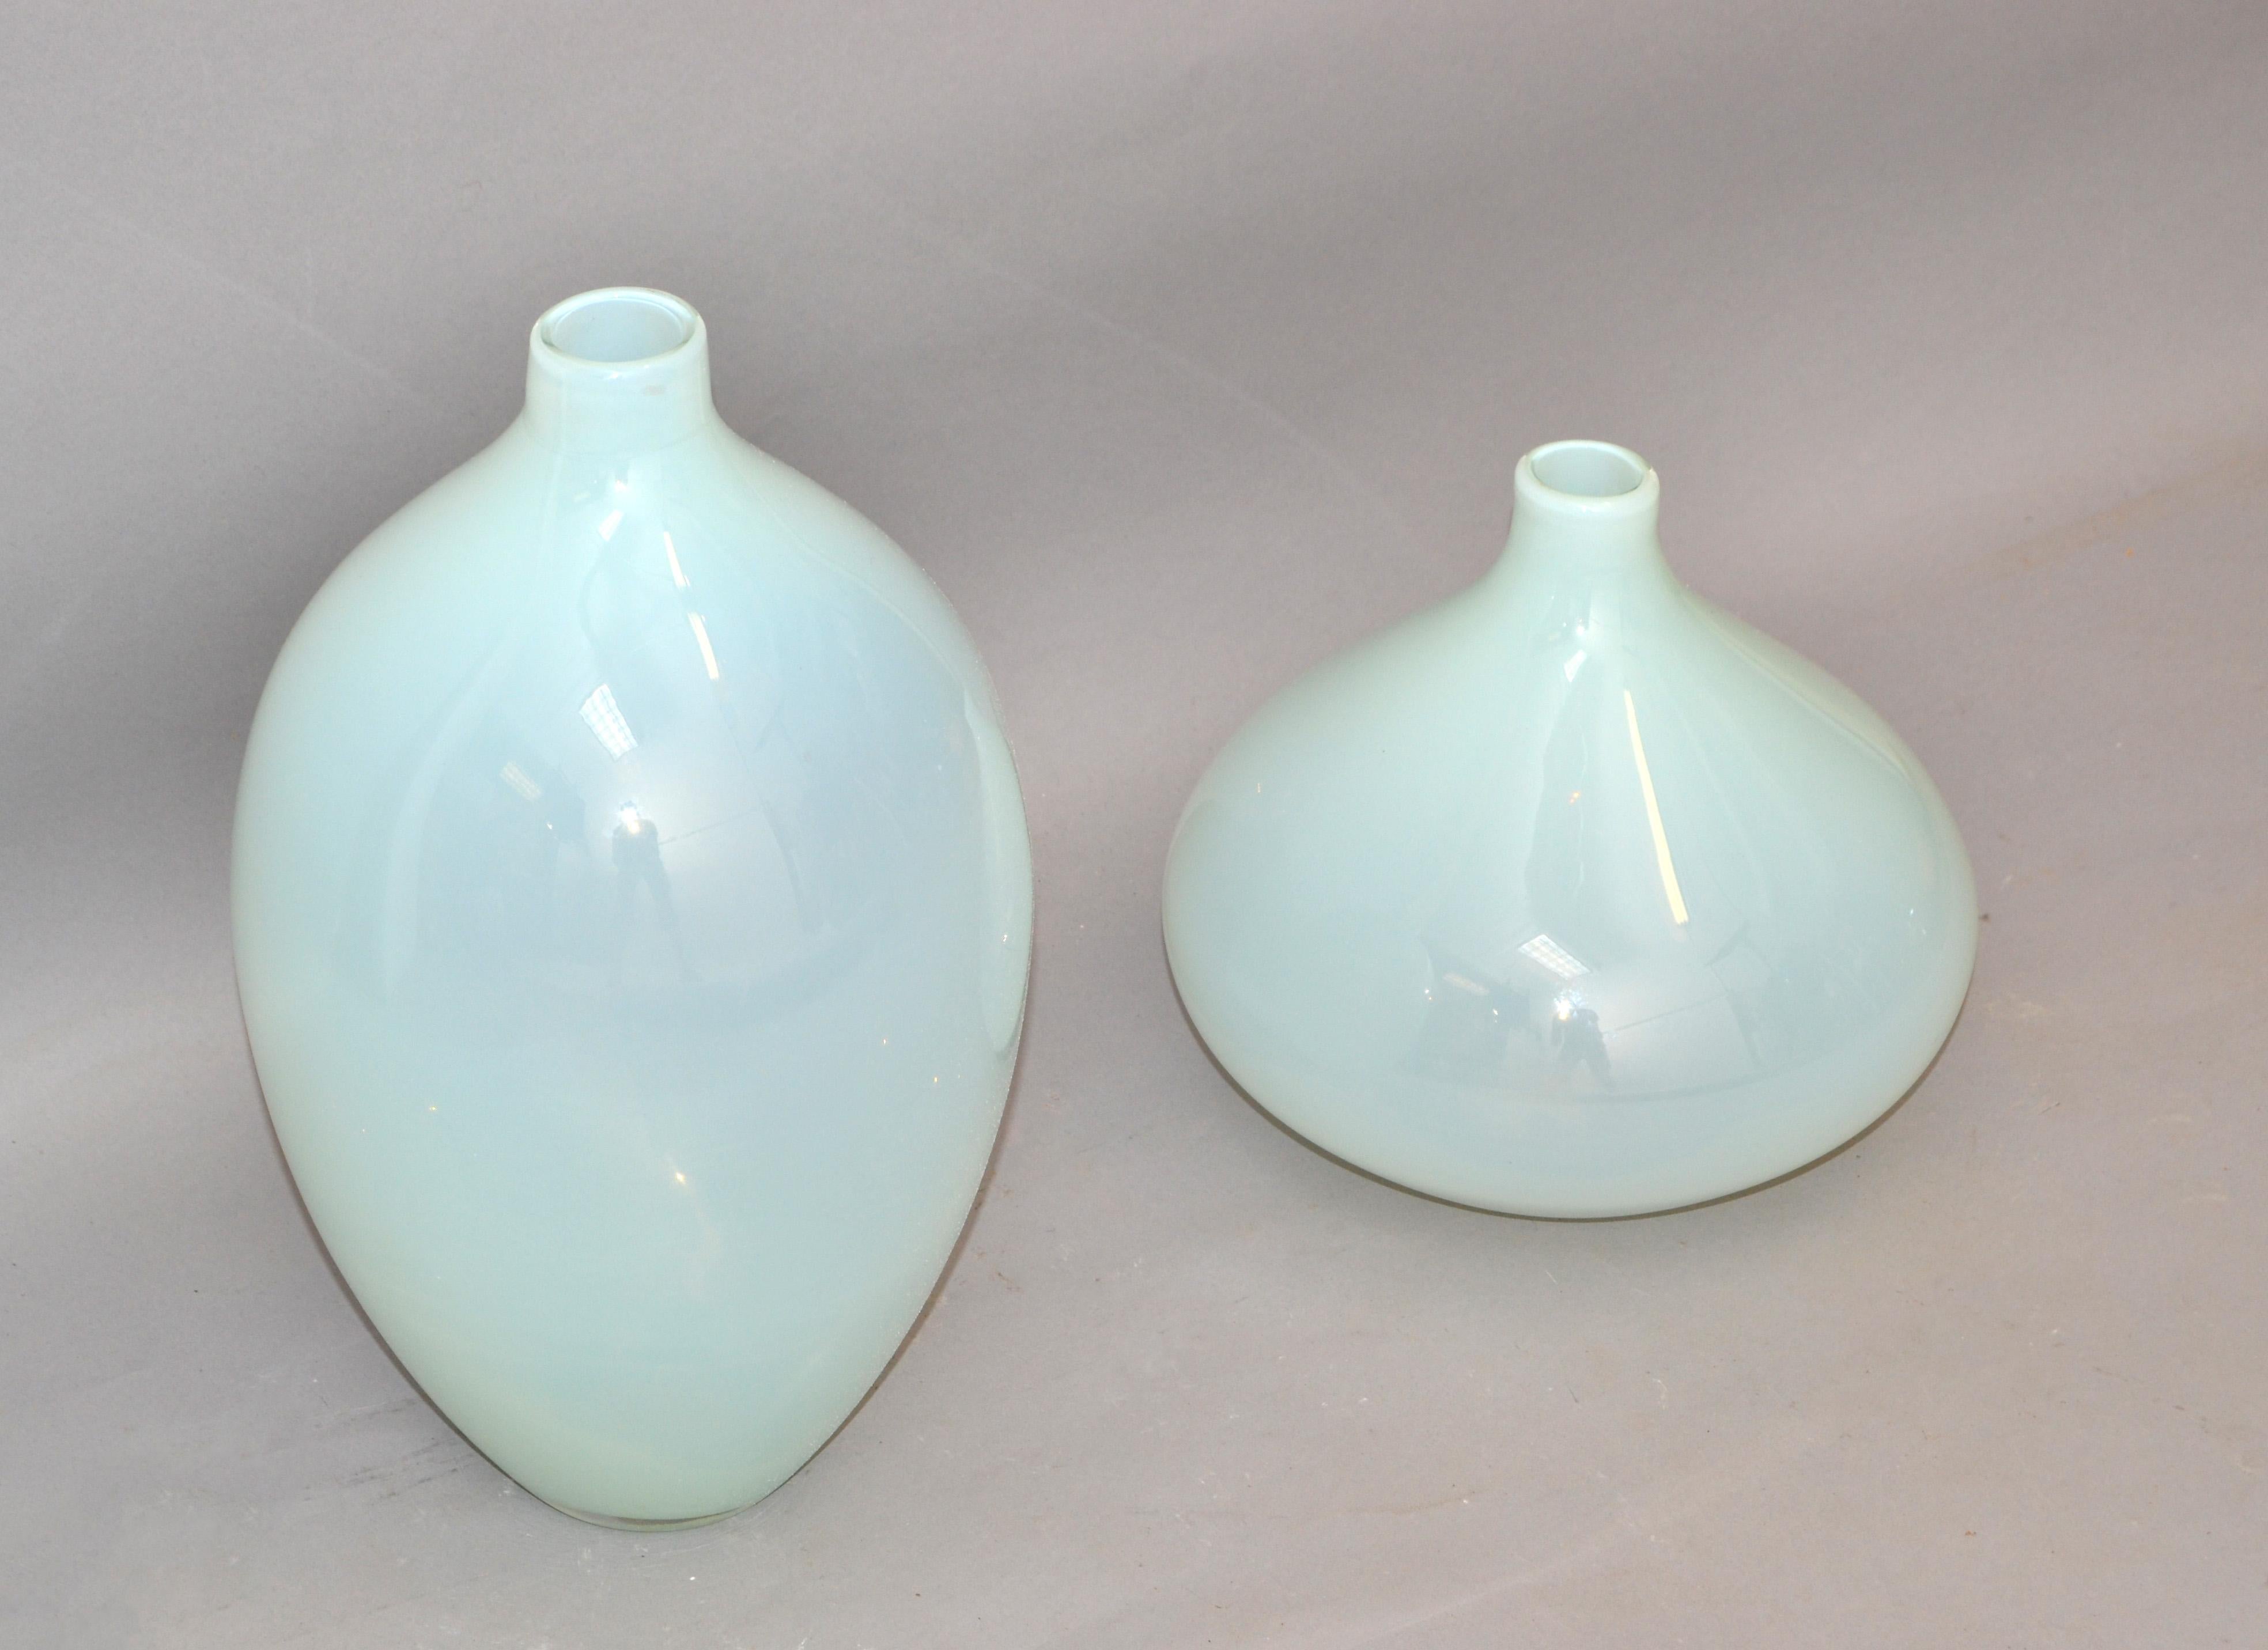 Set of 2 translucent baby blue Mid-Century Modern handmade art glass vessel, vase, decanter in the Style of Blenko.
Round Vessels blown in clear and light blue Glass.
The Smaller Vase measures: 
Height: 8.5 inches.
Diameter: 9 inches.
Great for